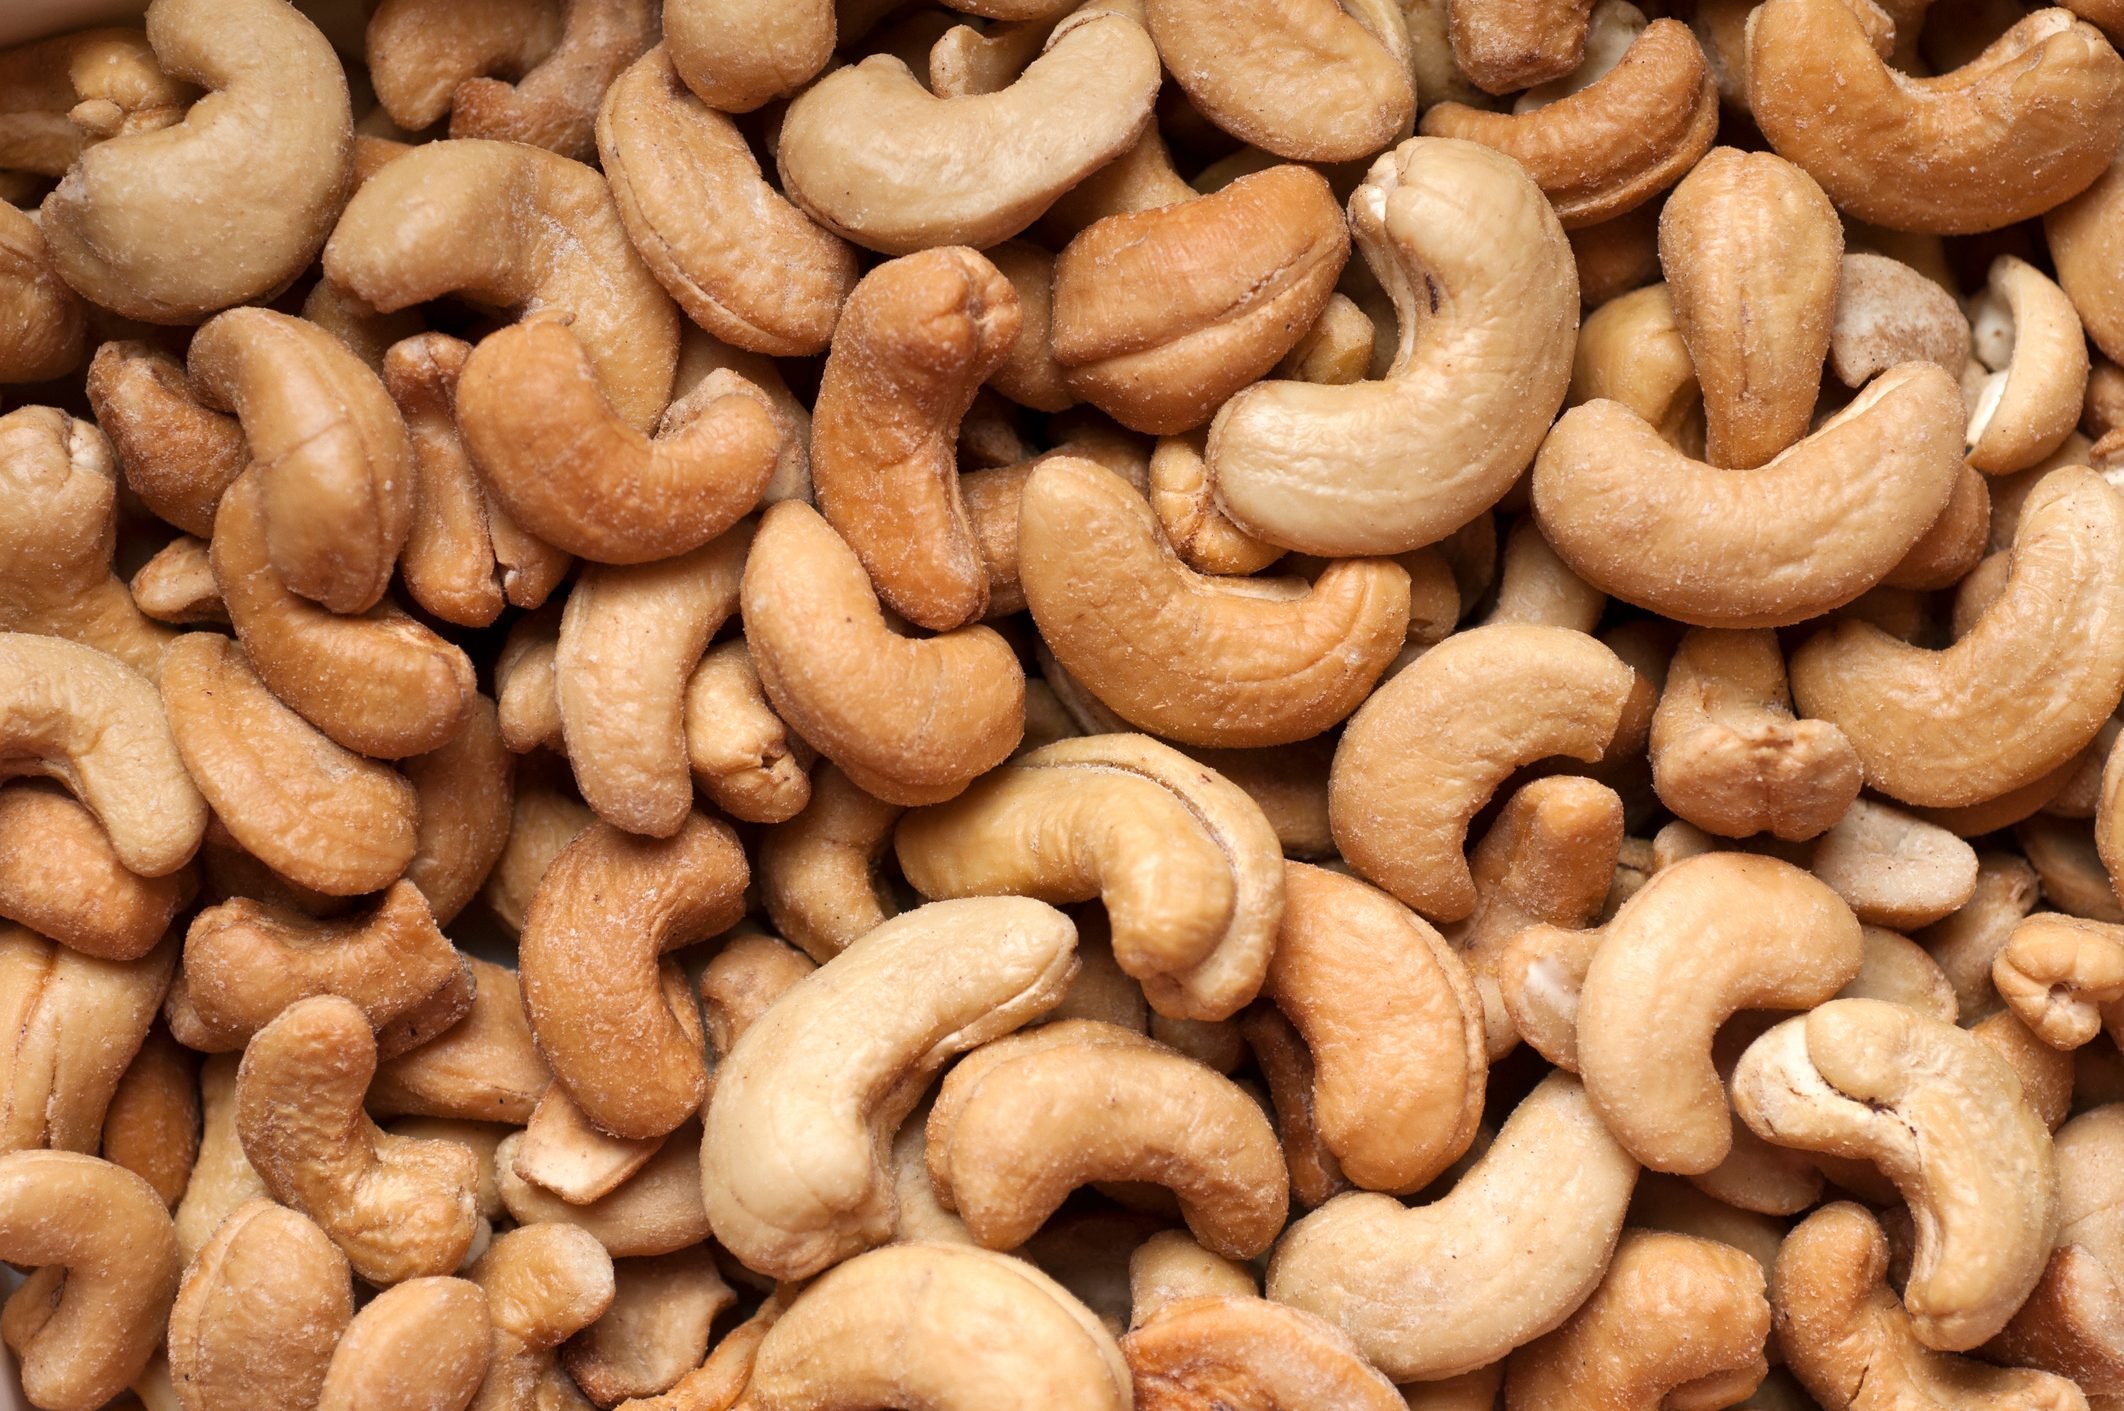 Are Cashews Good for You? Here are the Nutrition Facts About Cashews